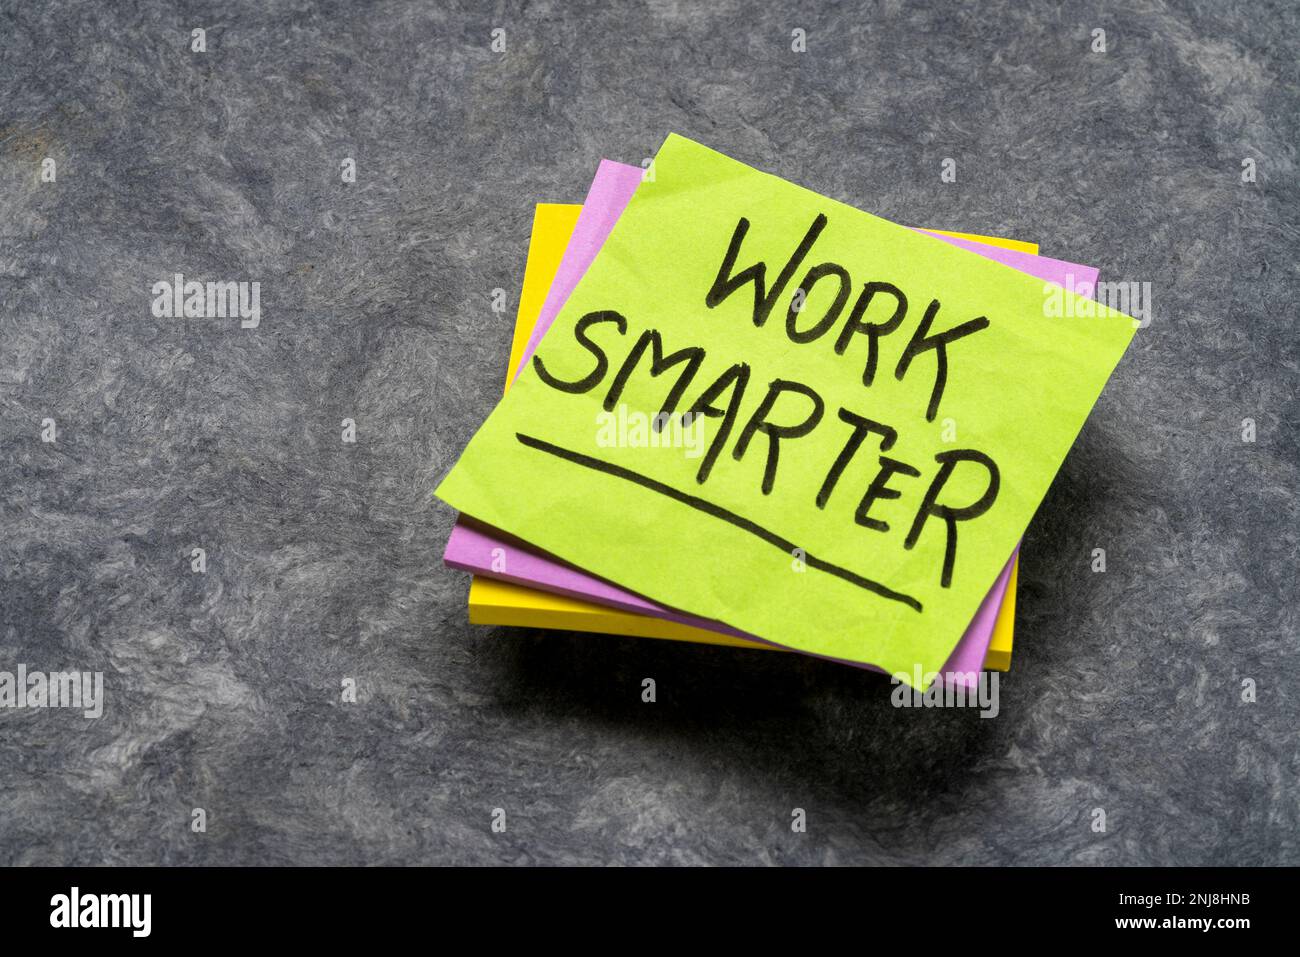 work smarter inspirational advice or reminder - handwriting on a sticky note Stock Photo